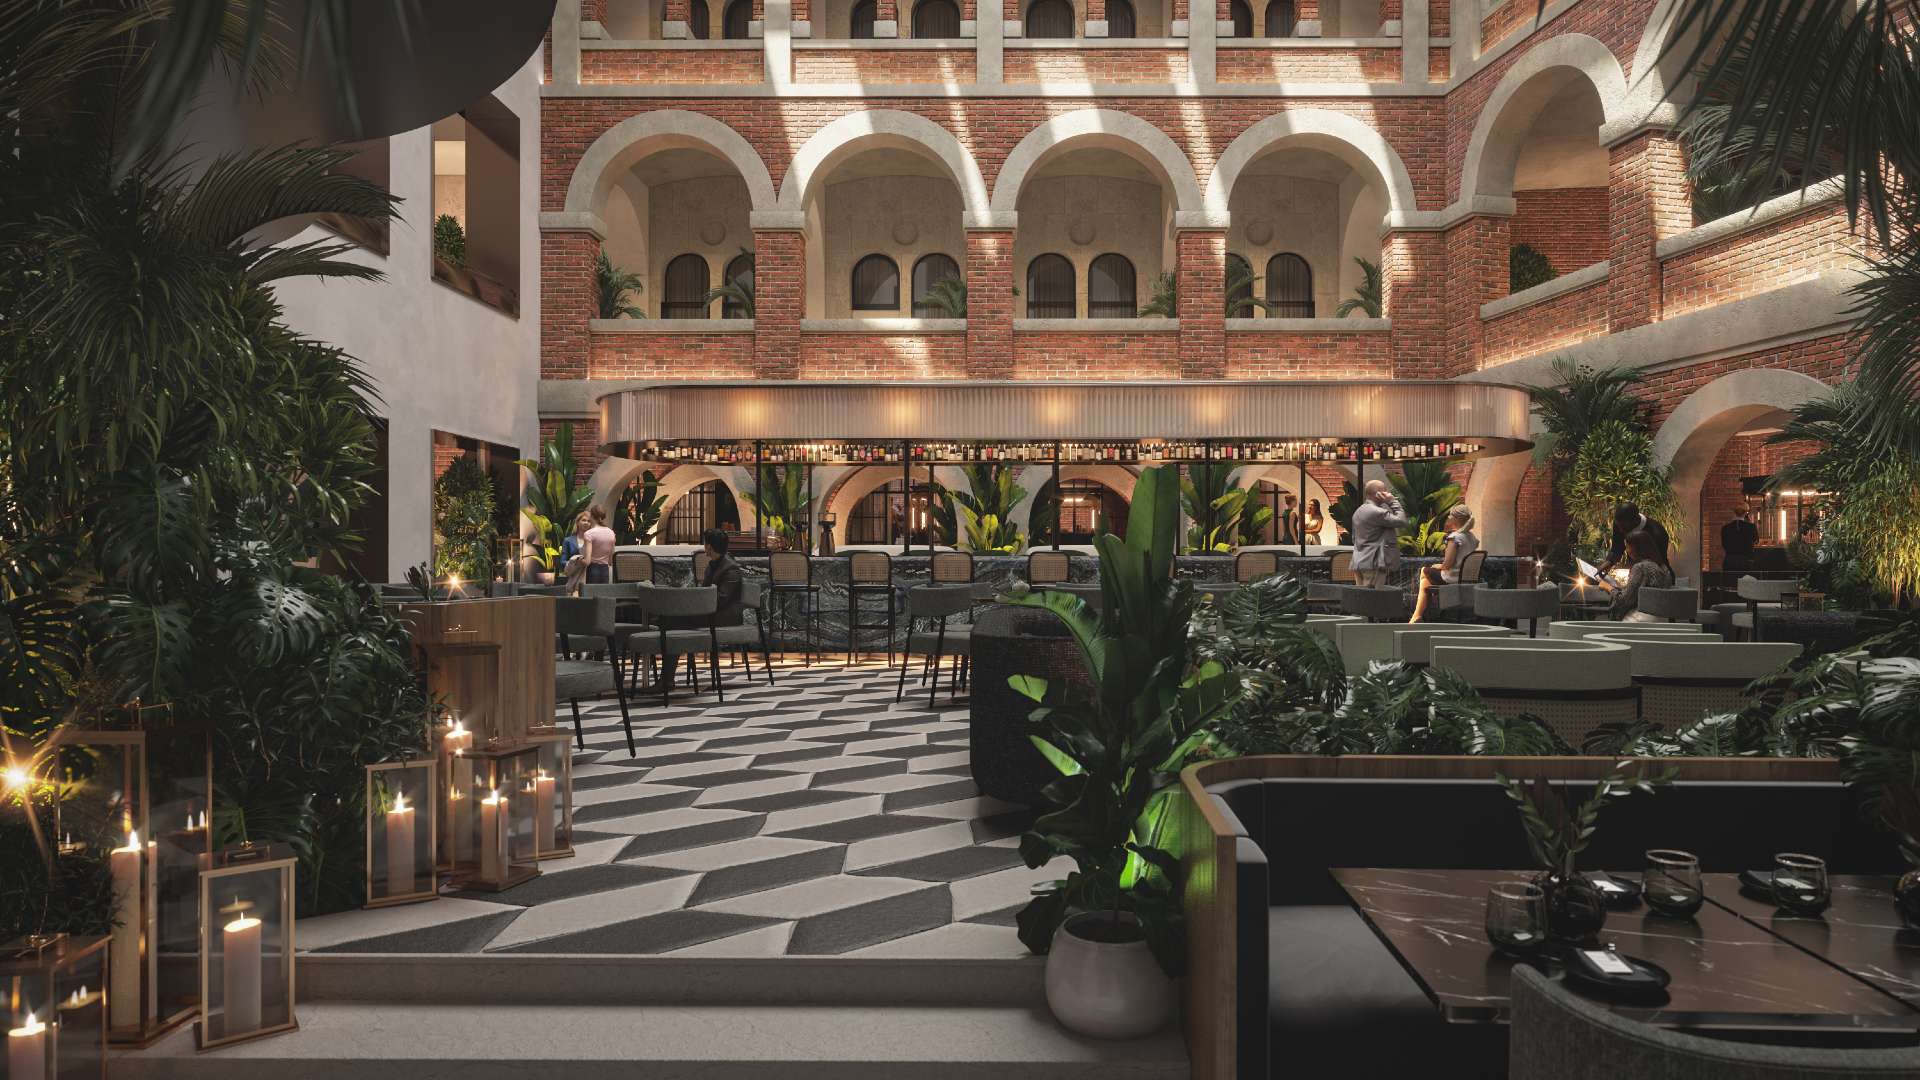 InterContinental Sydney and Its Heritage-Listed Building Have Been Given a $110 Million Revamp